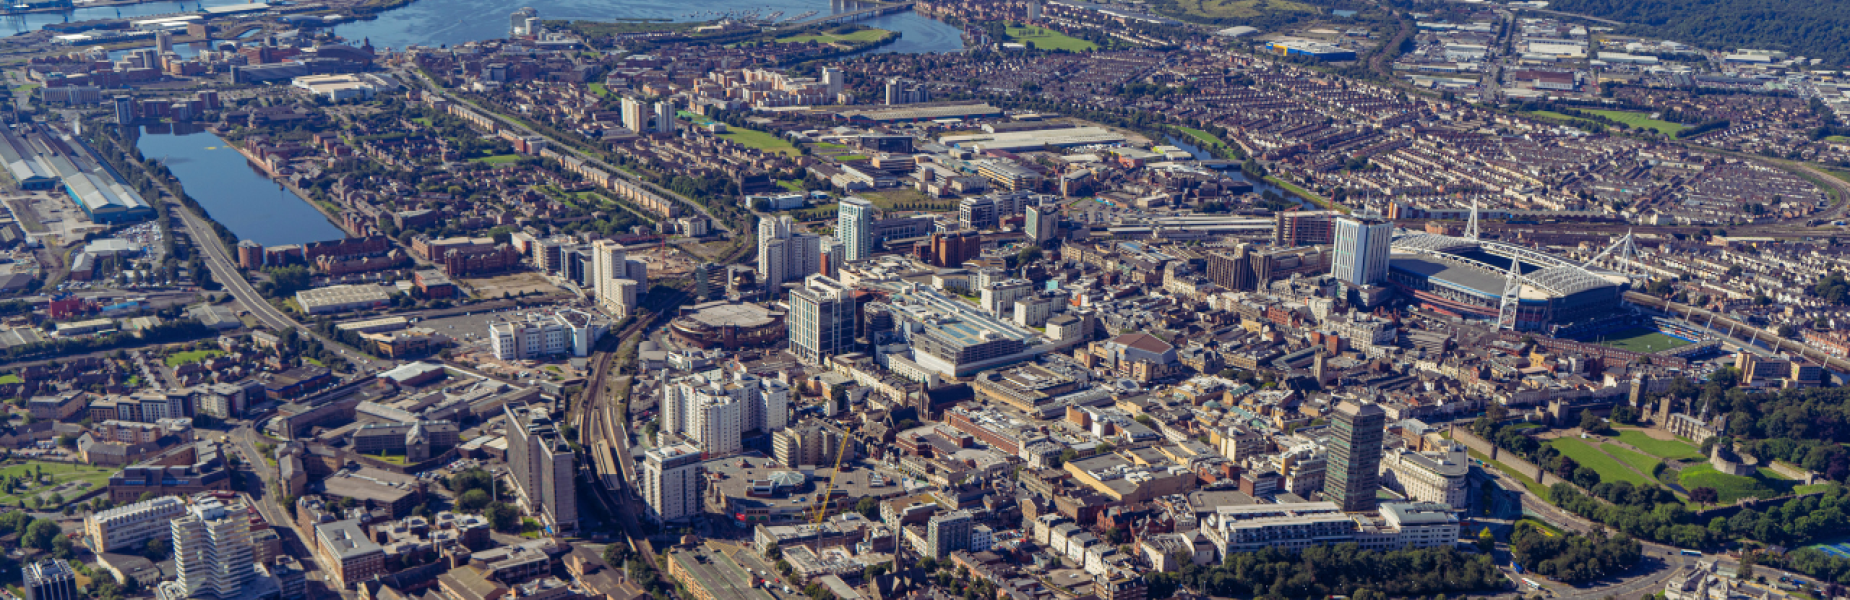 Image of central Cardiff